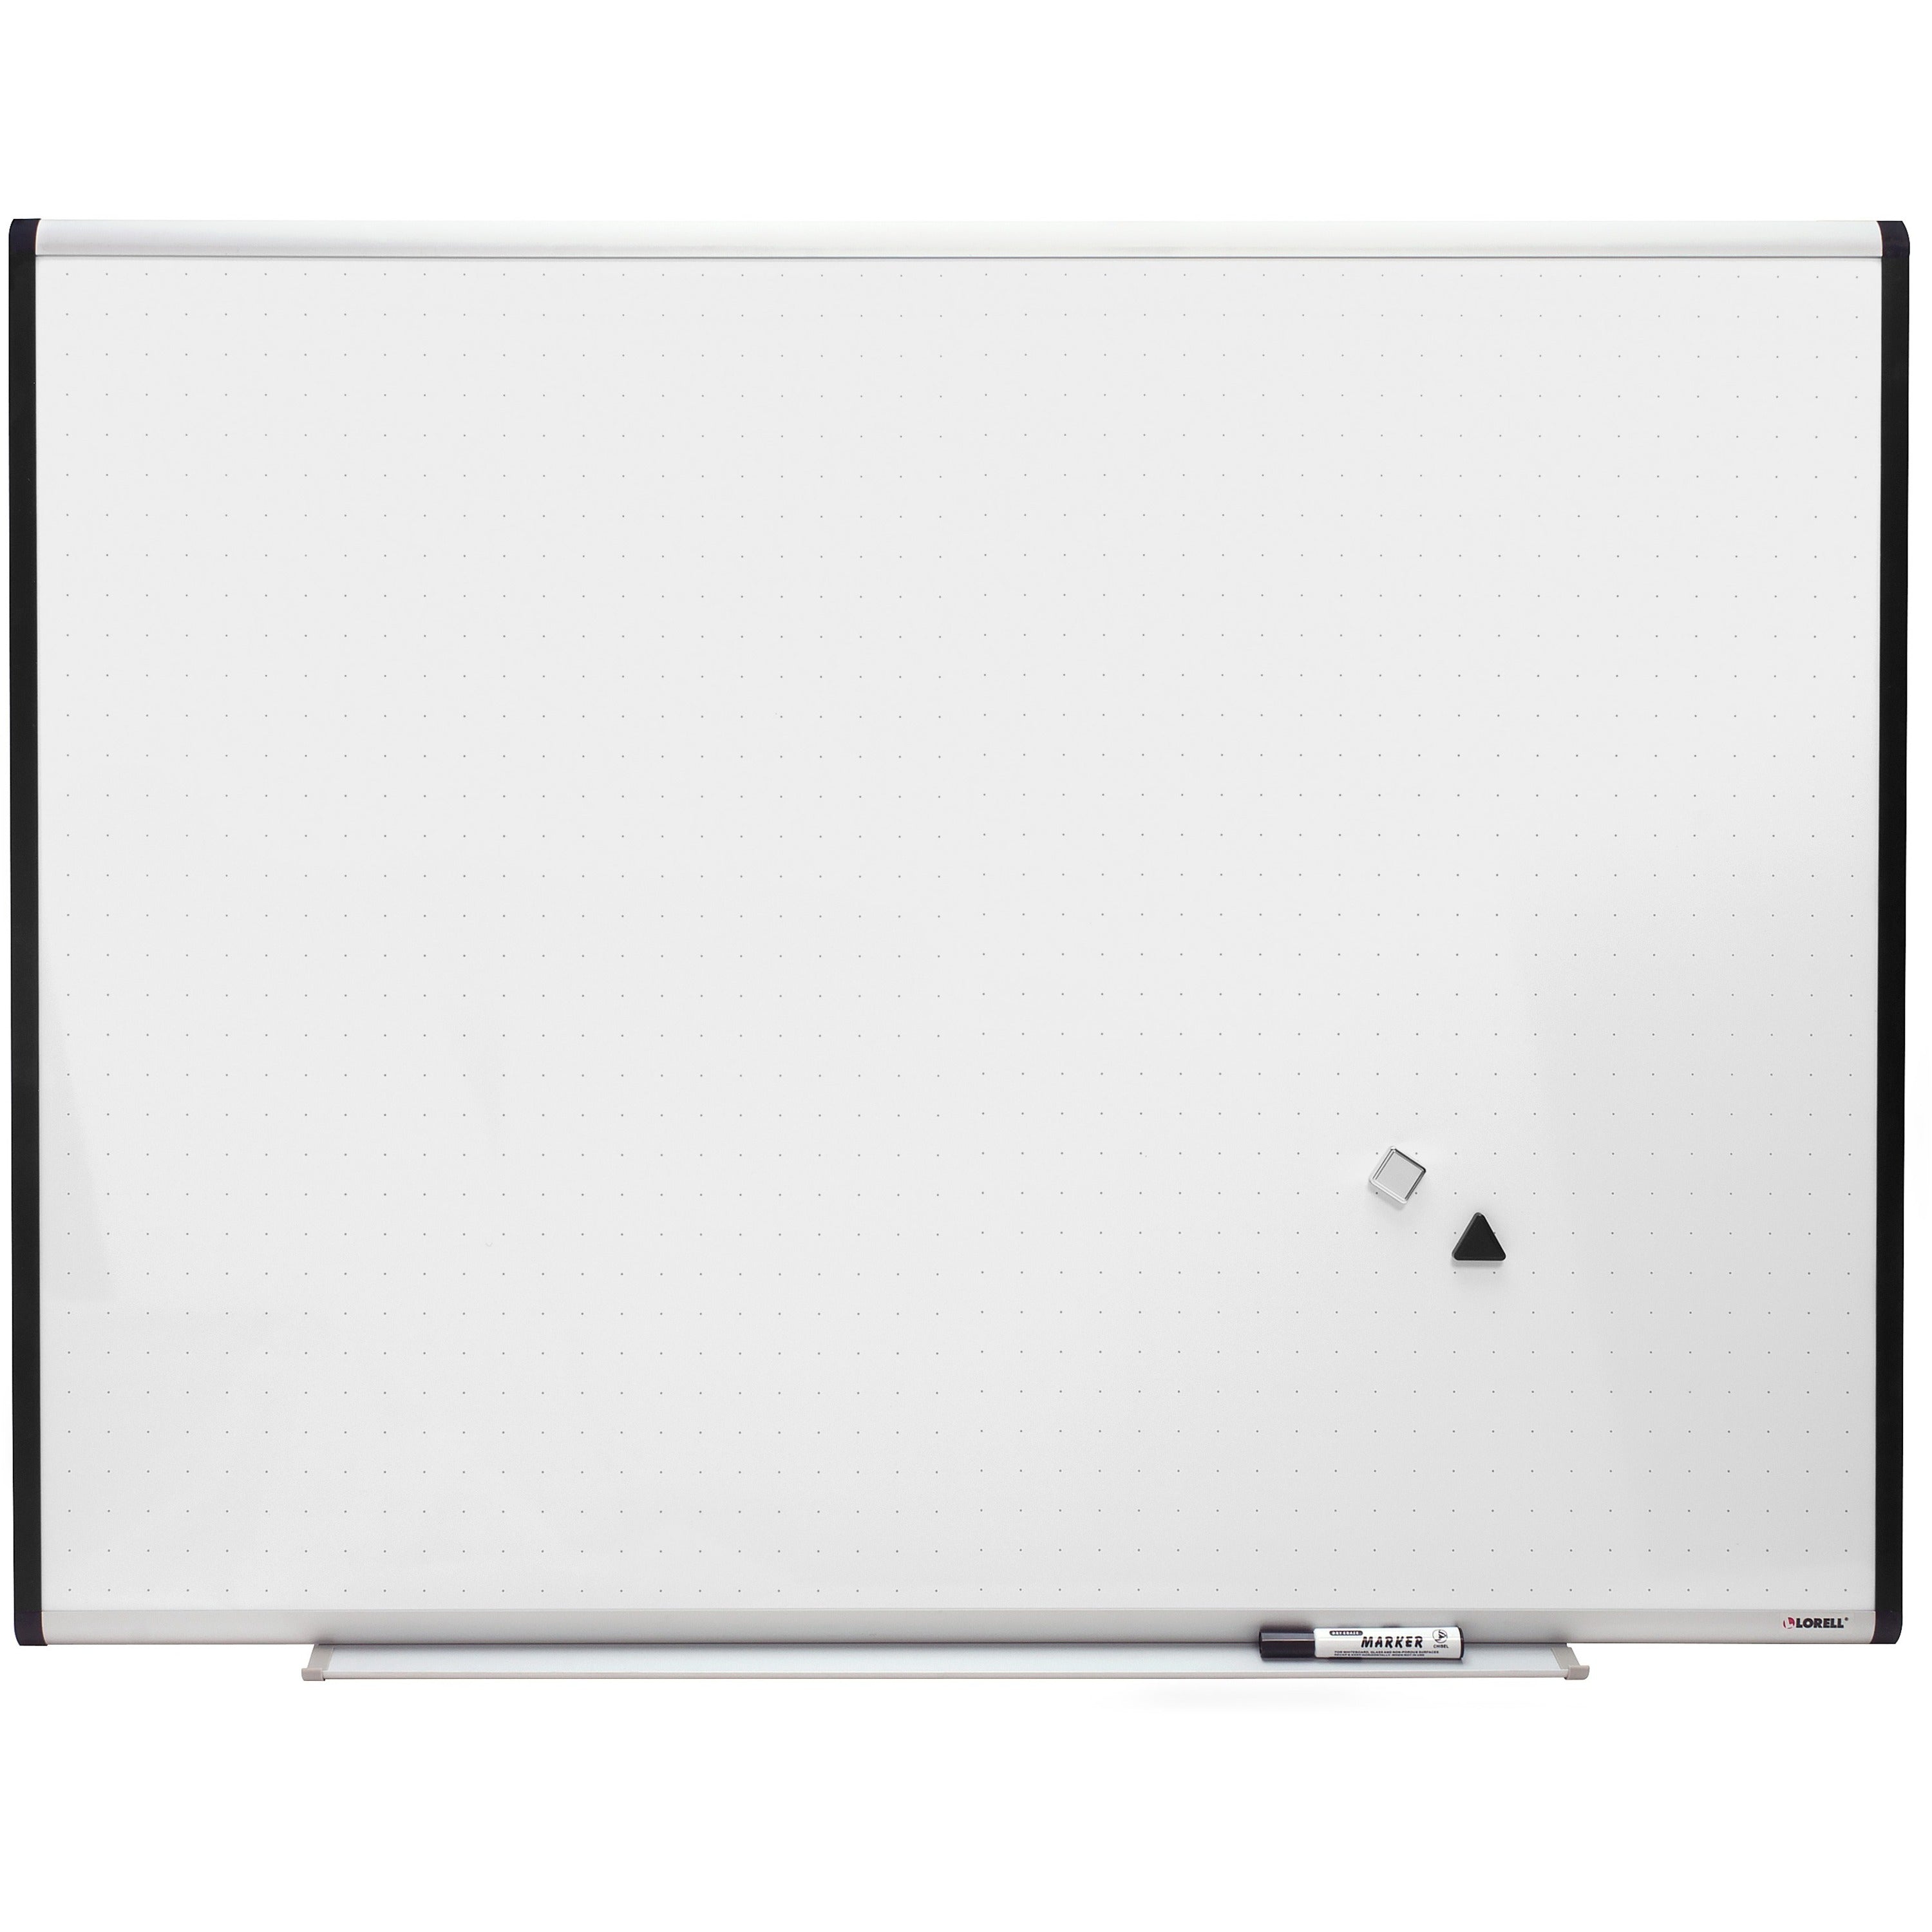 Lorell Signature Series Magnetic Dry-erase Markerboard - 48" (4 ft) Width x 36" (3 ft) Height - Porcelain Surface - Silver, Ebony Frame - Magnetic - Grid Pattern - 1 Each - 